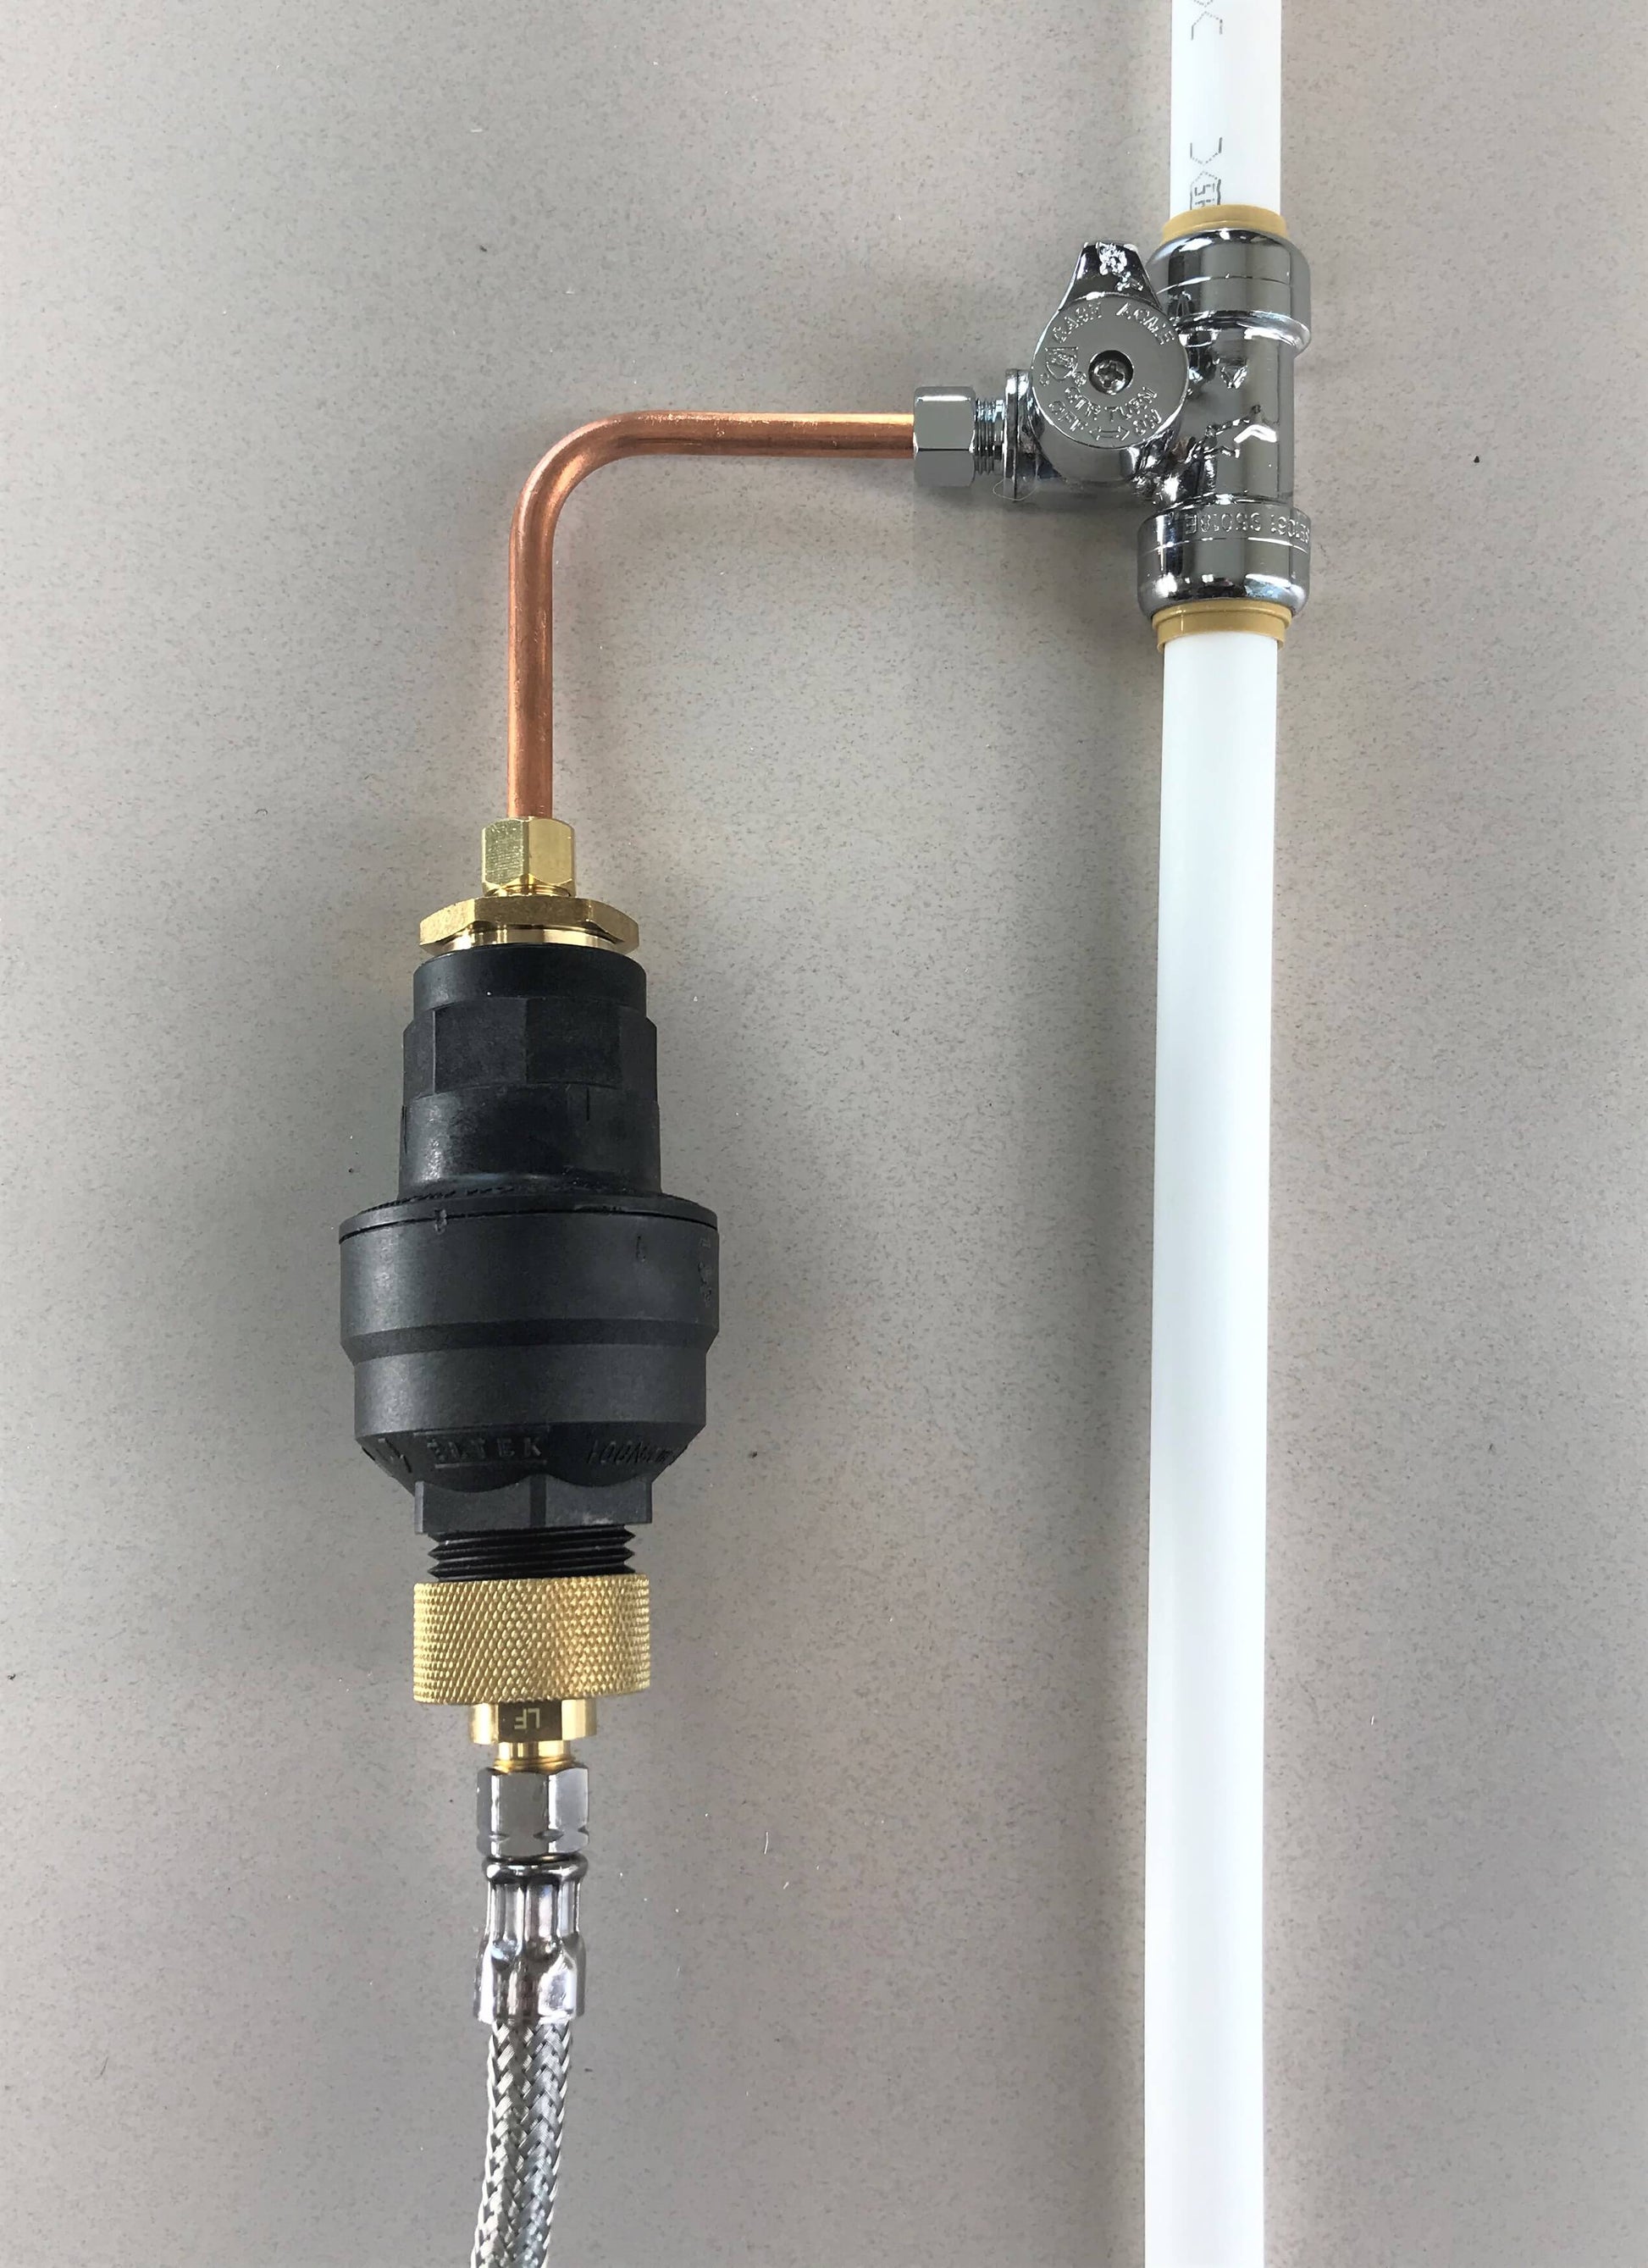 Water Block 3/8" shutoff kit configuration connected to a 3/8" stainless steel hose and a 3/8" copper supply line. This is good for a refrigerator, beverage machine, or water fountain application.